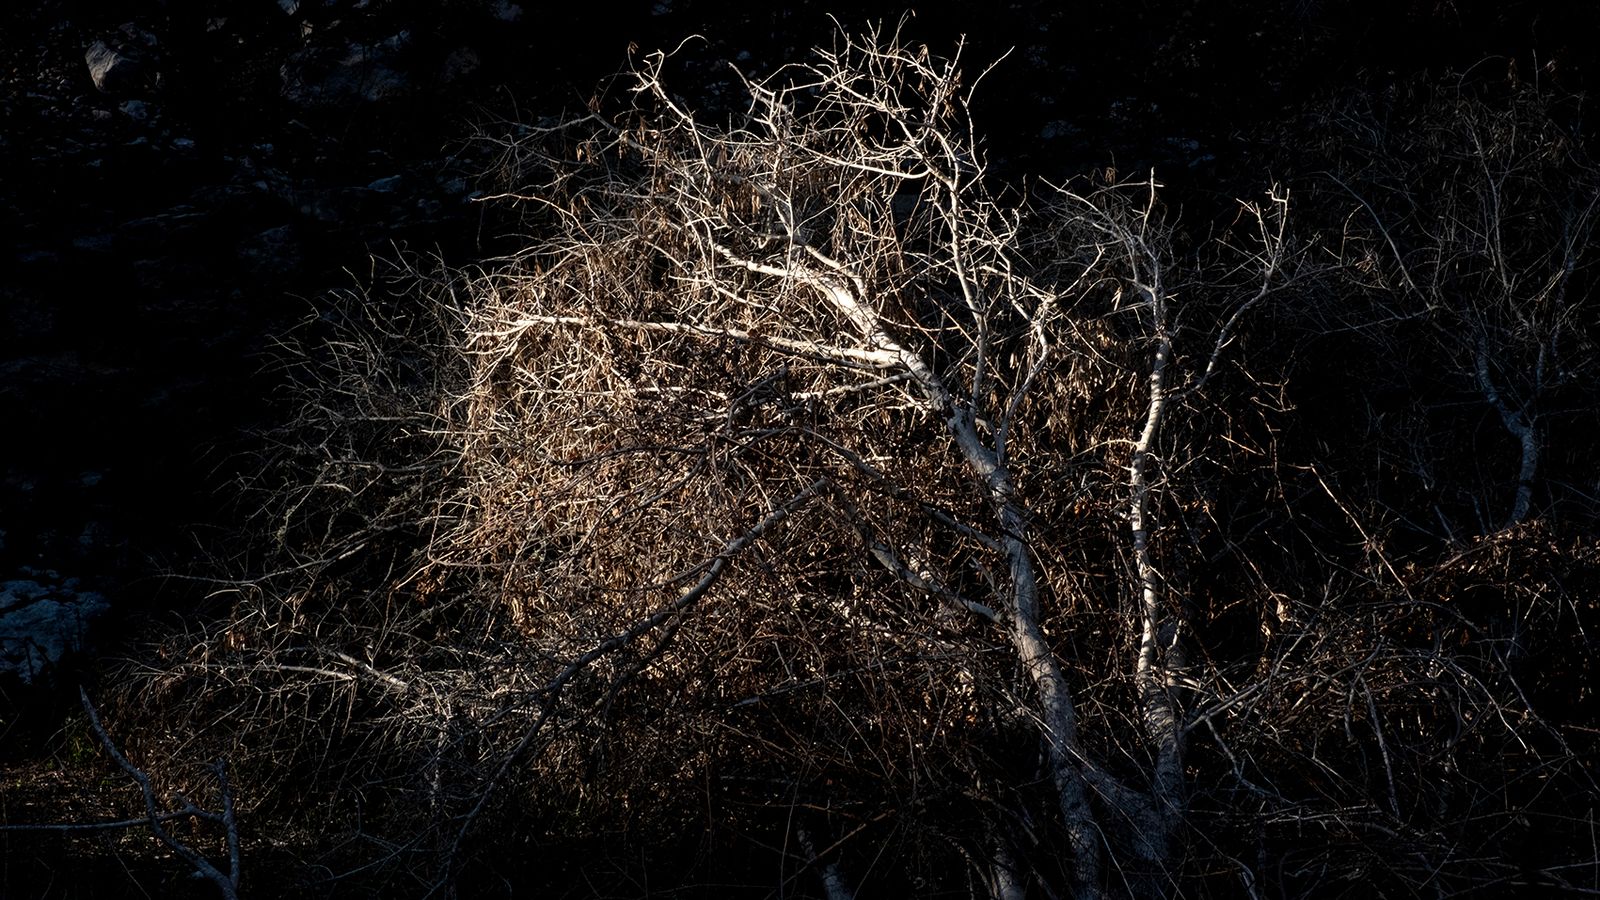 © Zaklina Anderson - Image from the Charred Beauty photography project